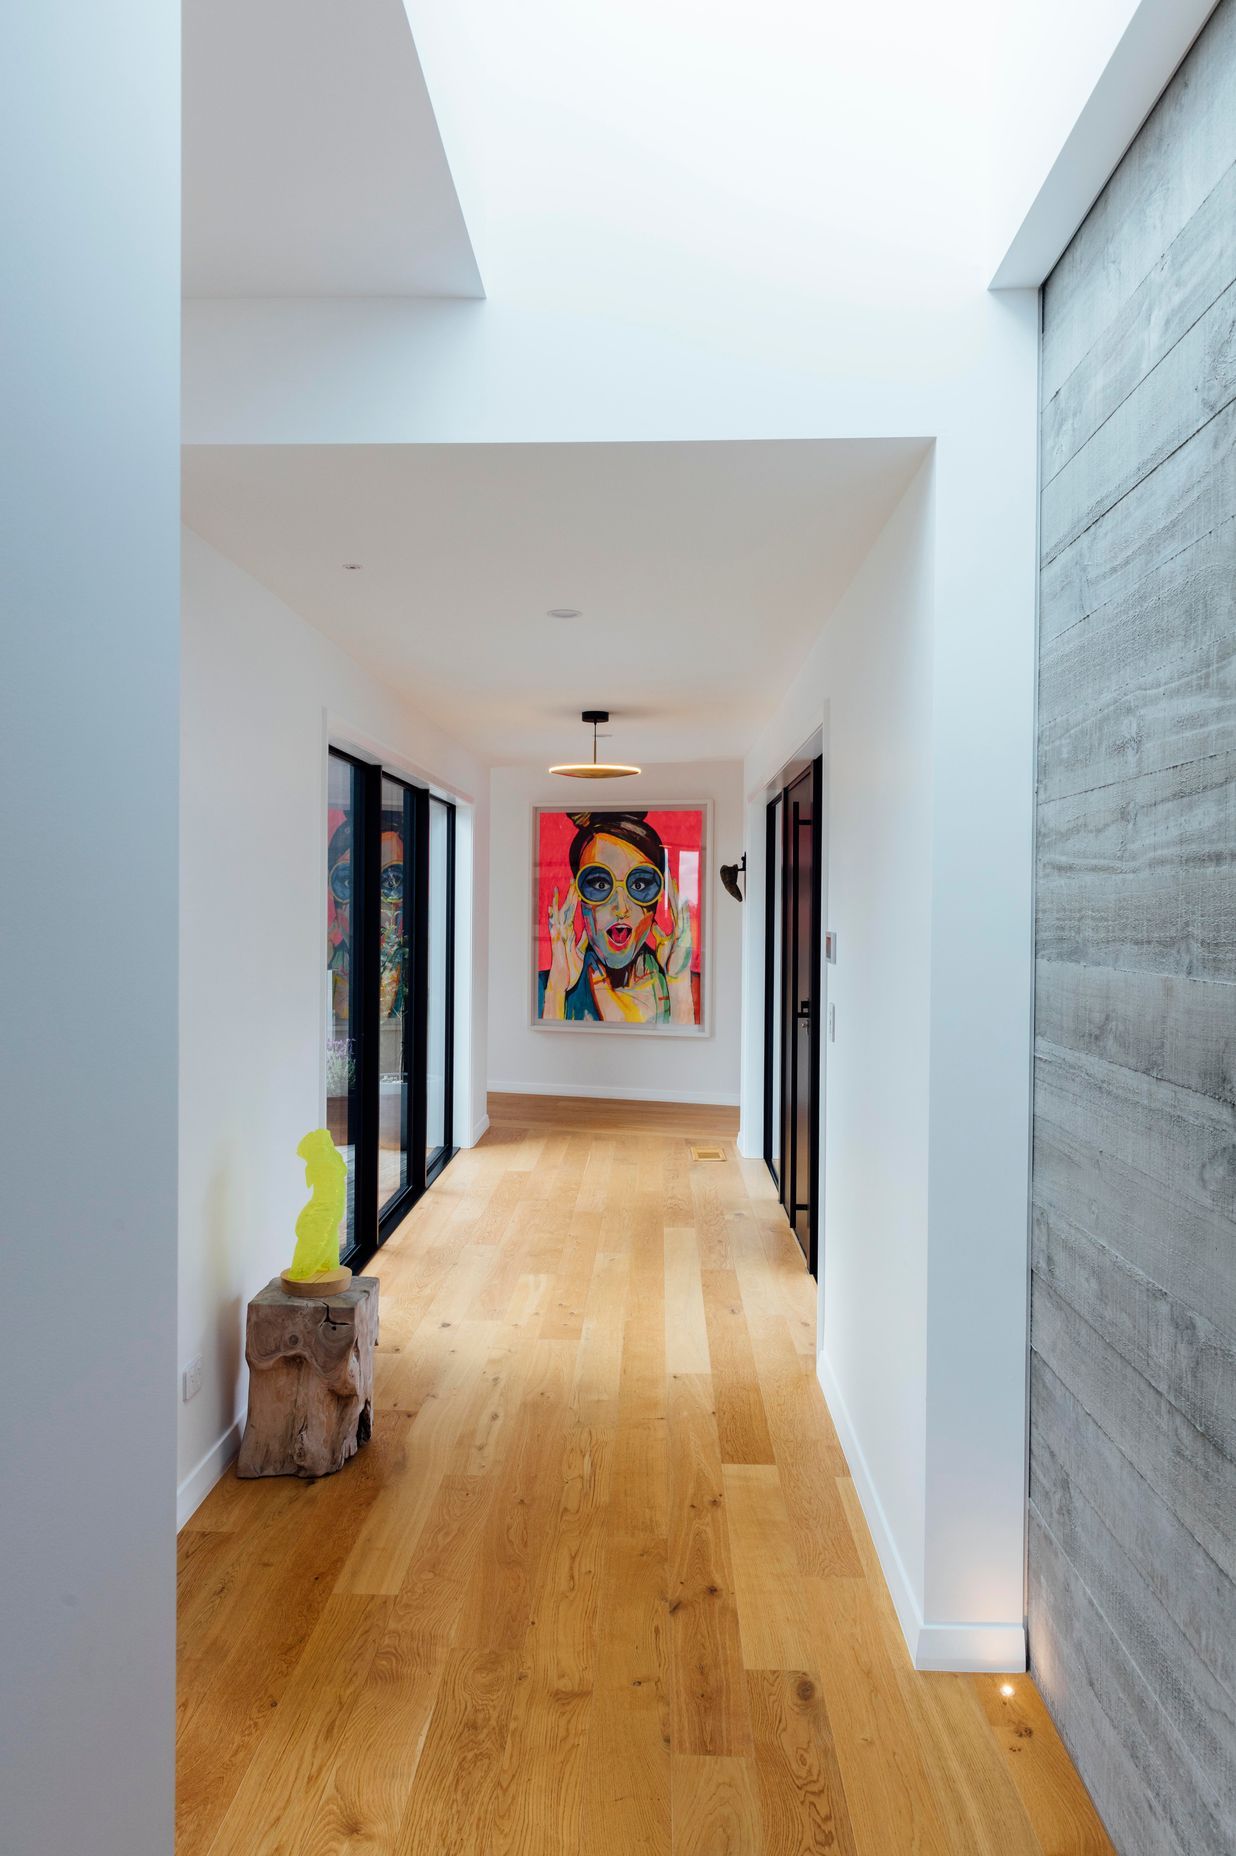 A painting by homeowner at the end of the hallway is based on artwork used on the bottle of the couple's favourite champagne: Gardet Raphael Laventure rosé.